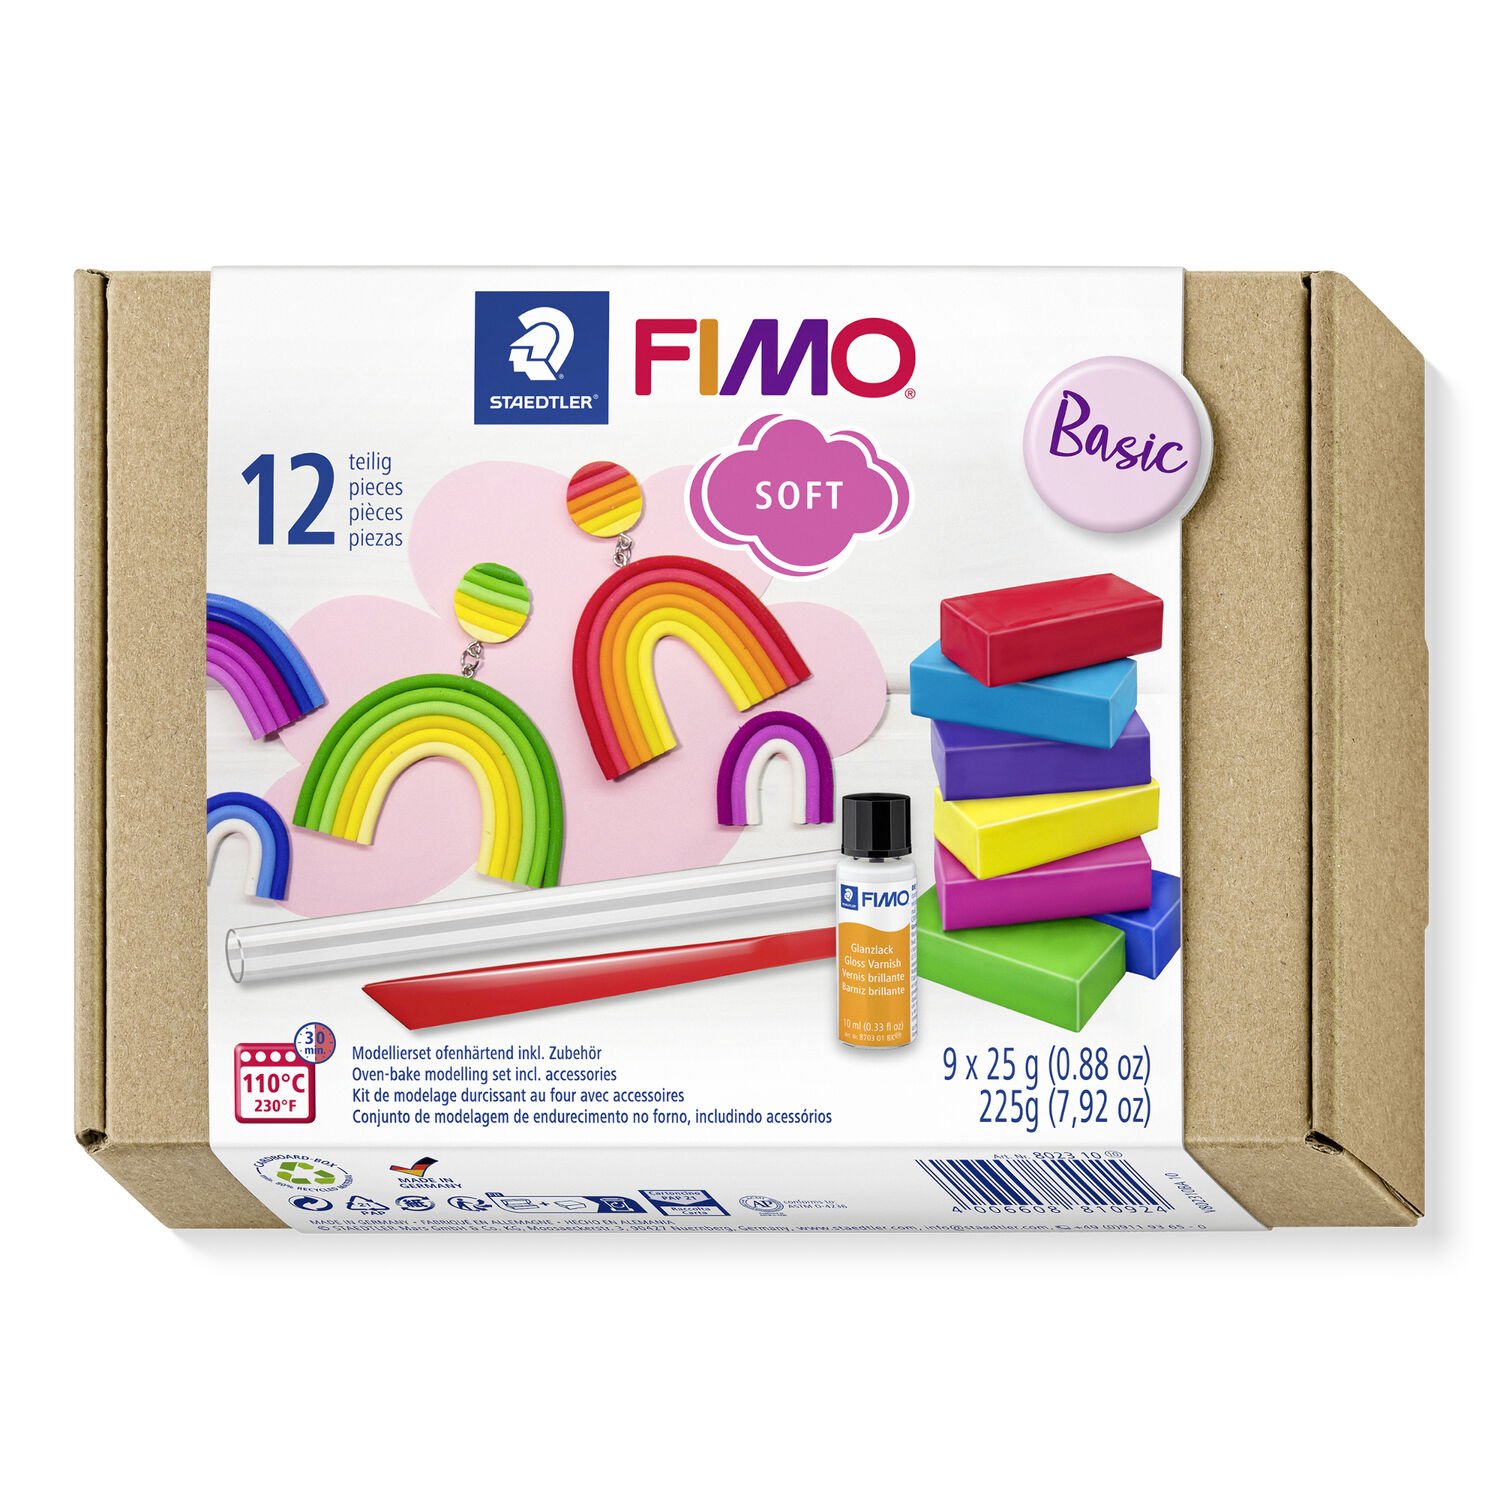 Staedtler FIMO Gloss Varnish for FIMO Modelling Clay - 10ml